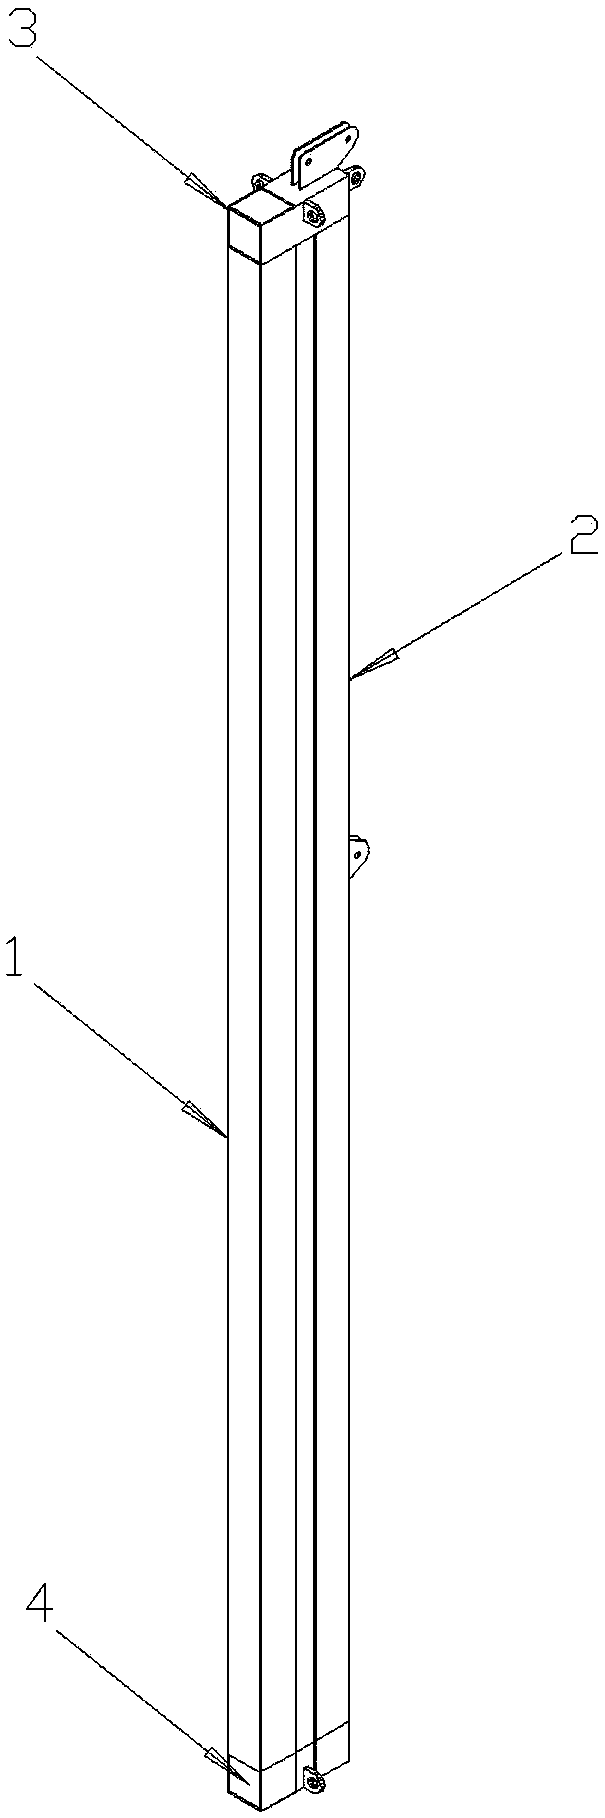 The sliding track of the guide tooling for lowering the Christmas tree